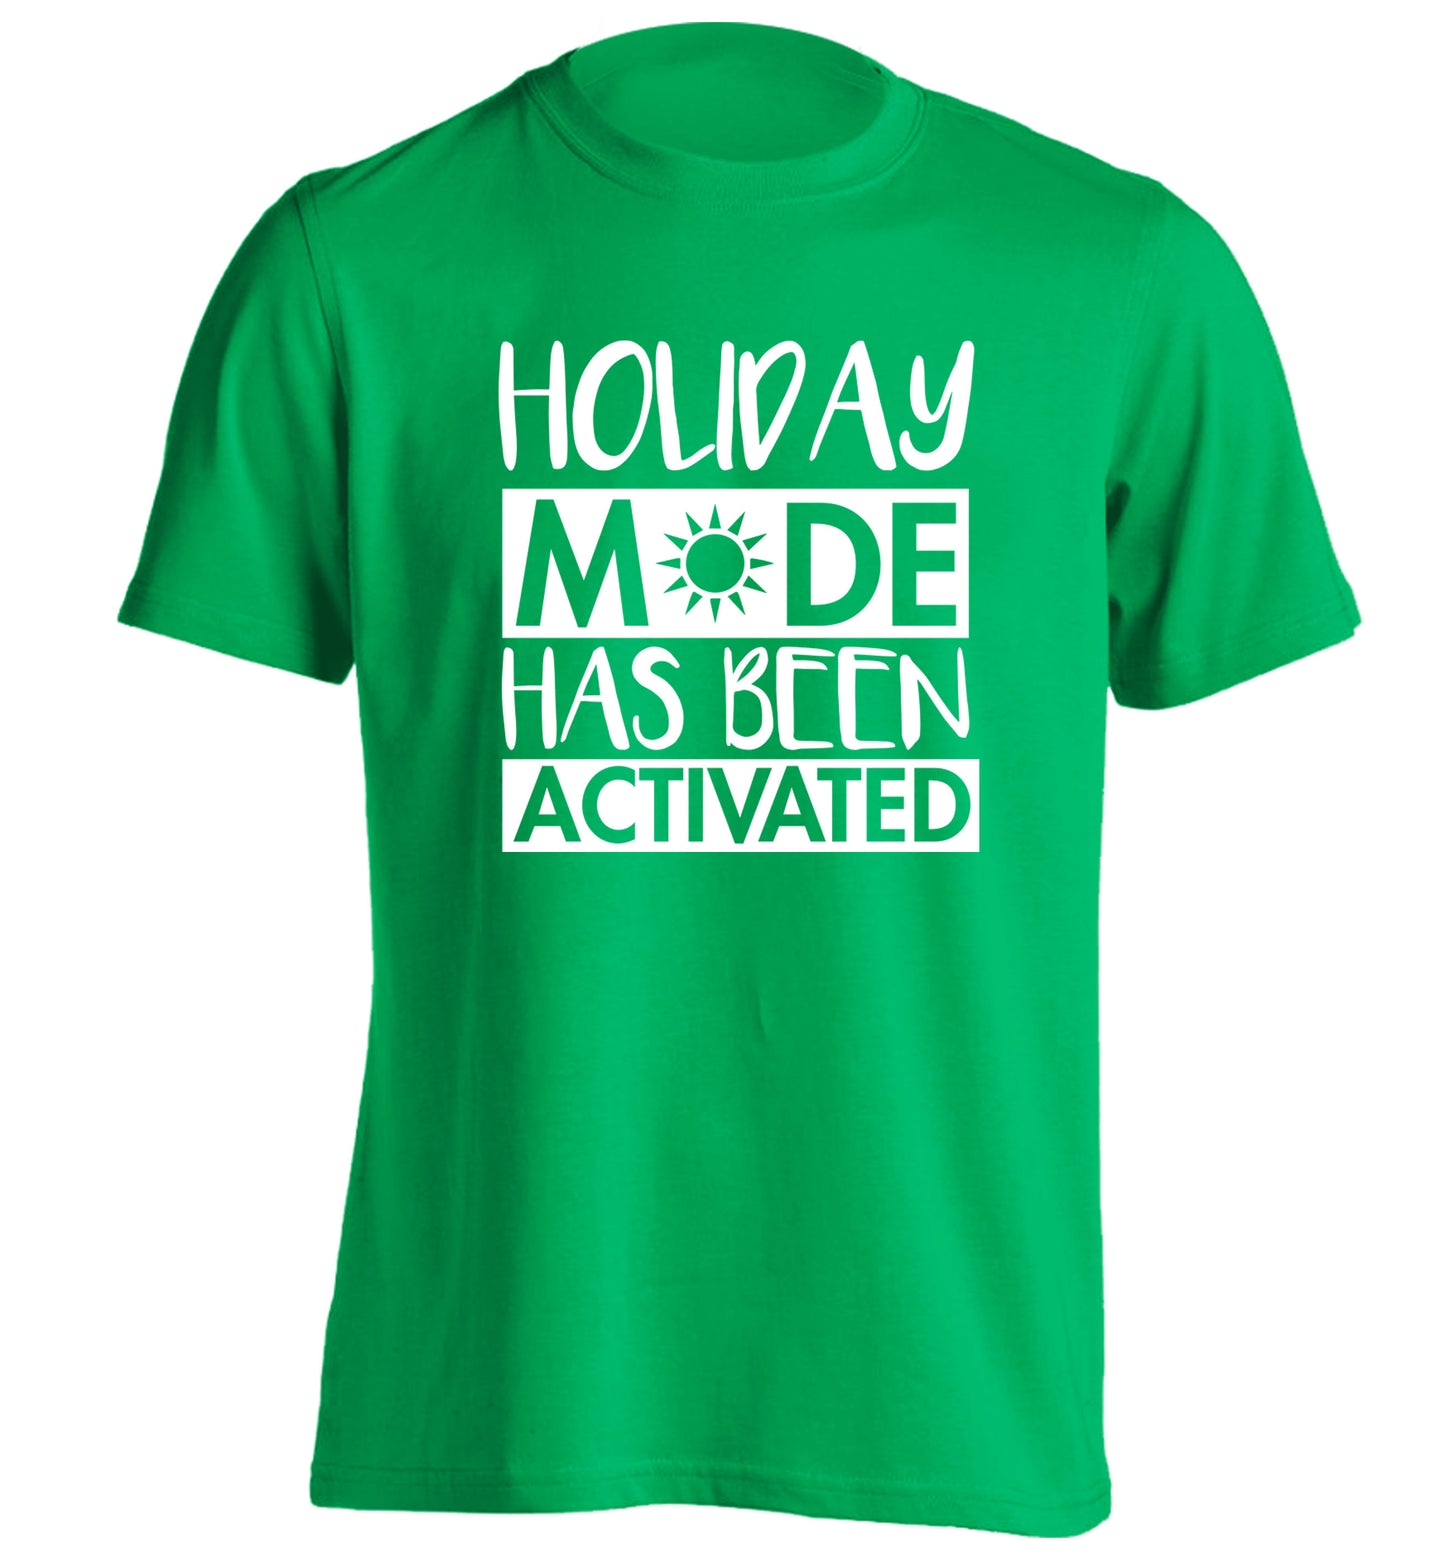 Holiday mode has been activated adults unisex green Tshirt 2XL